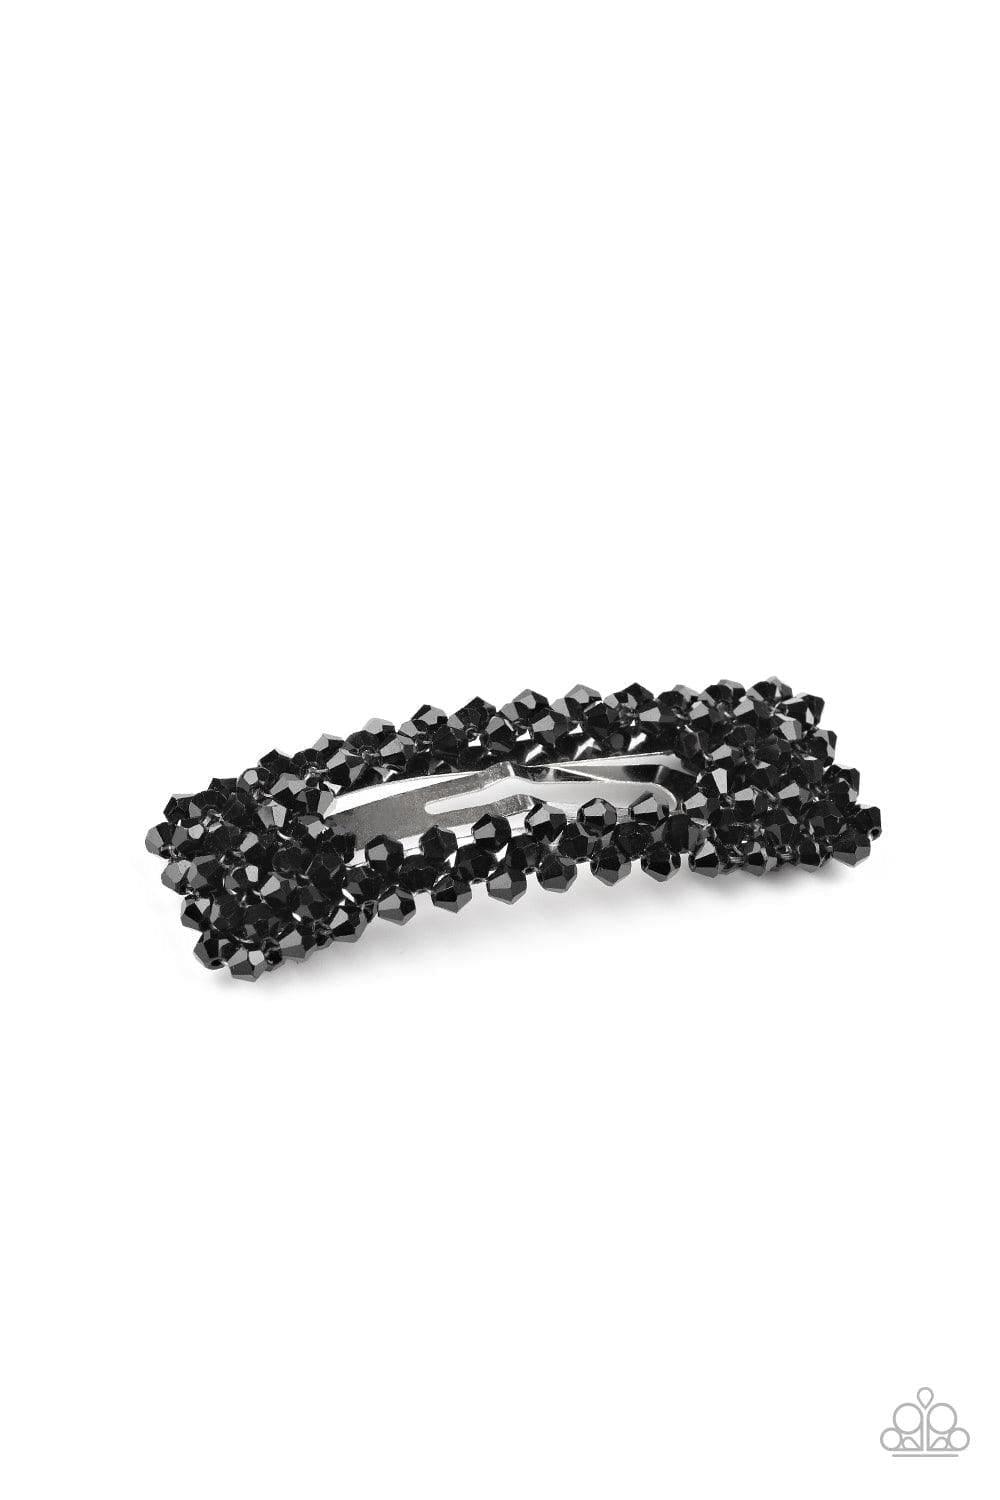 Paparazzi Accessories - No Filter - Black Hair Clip - Bling by JessieK